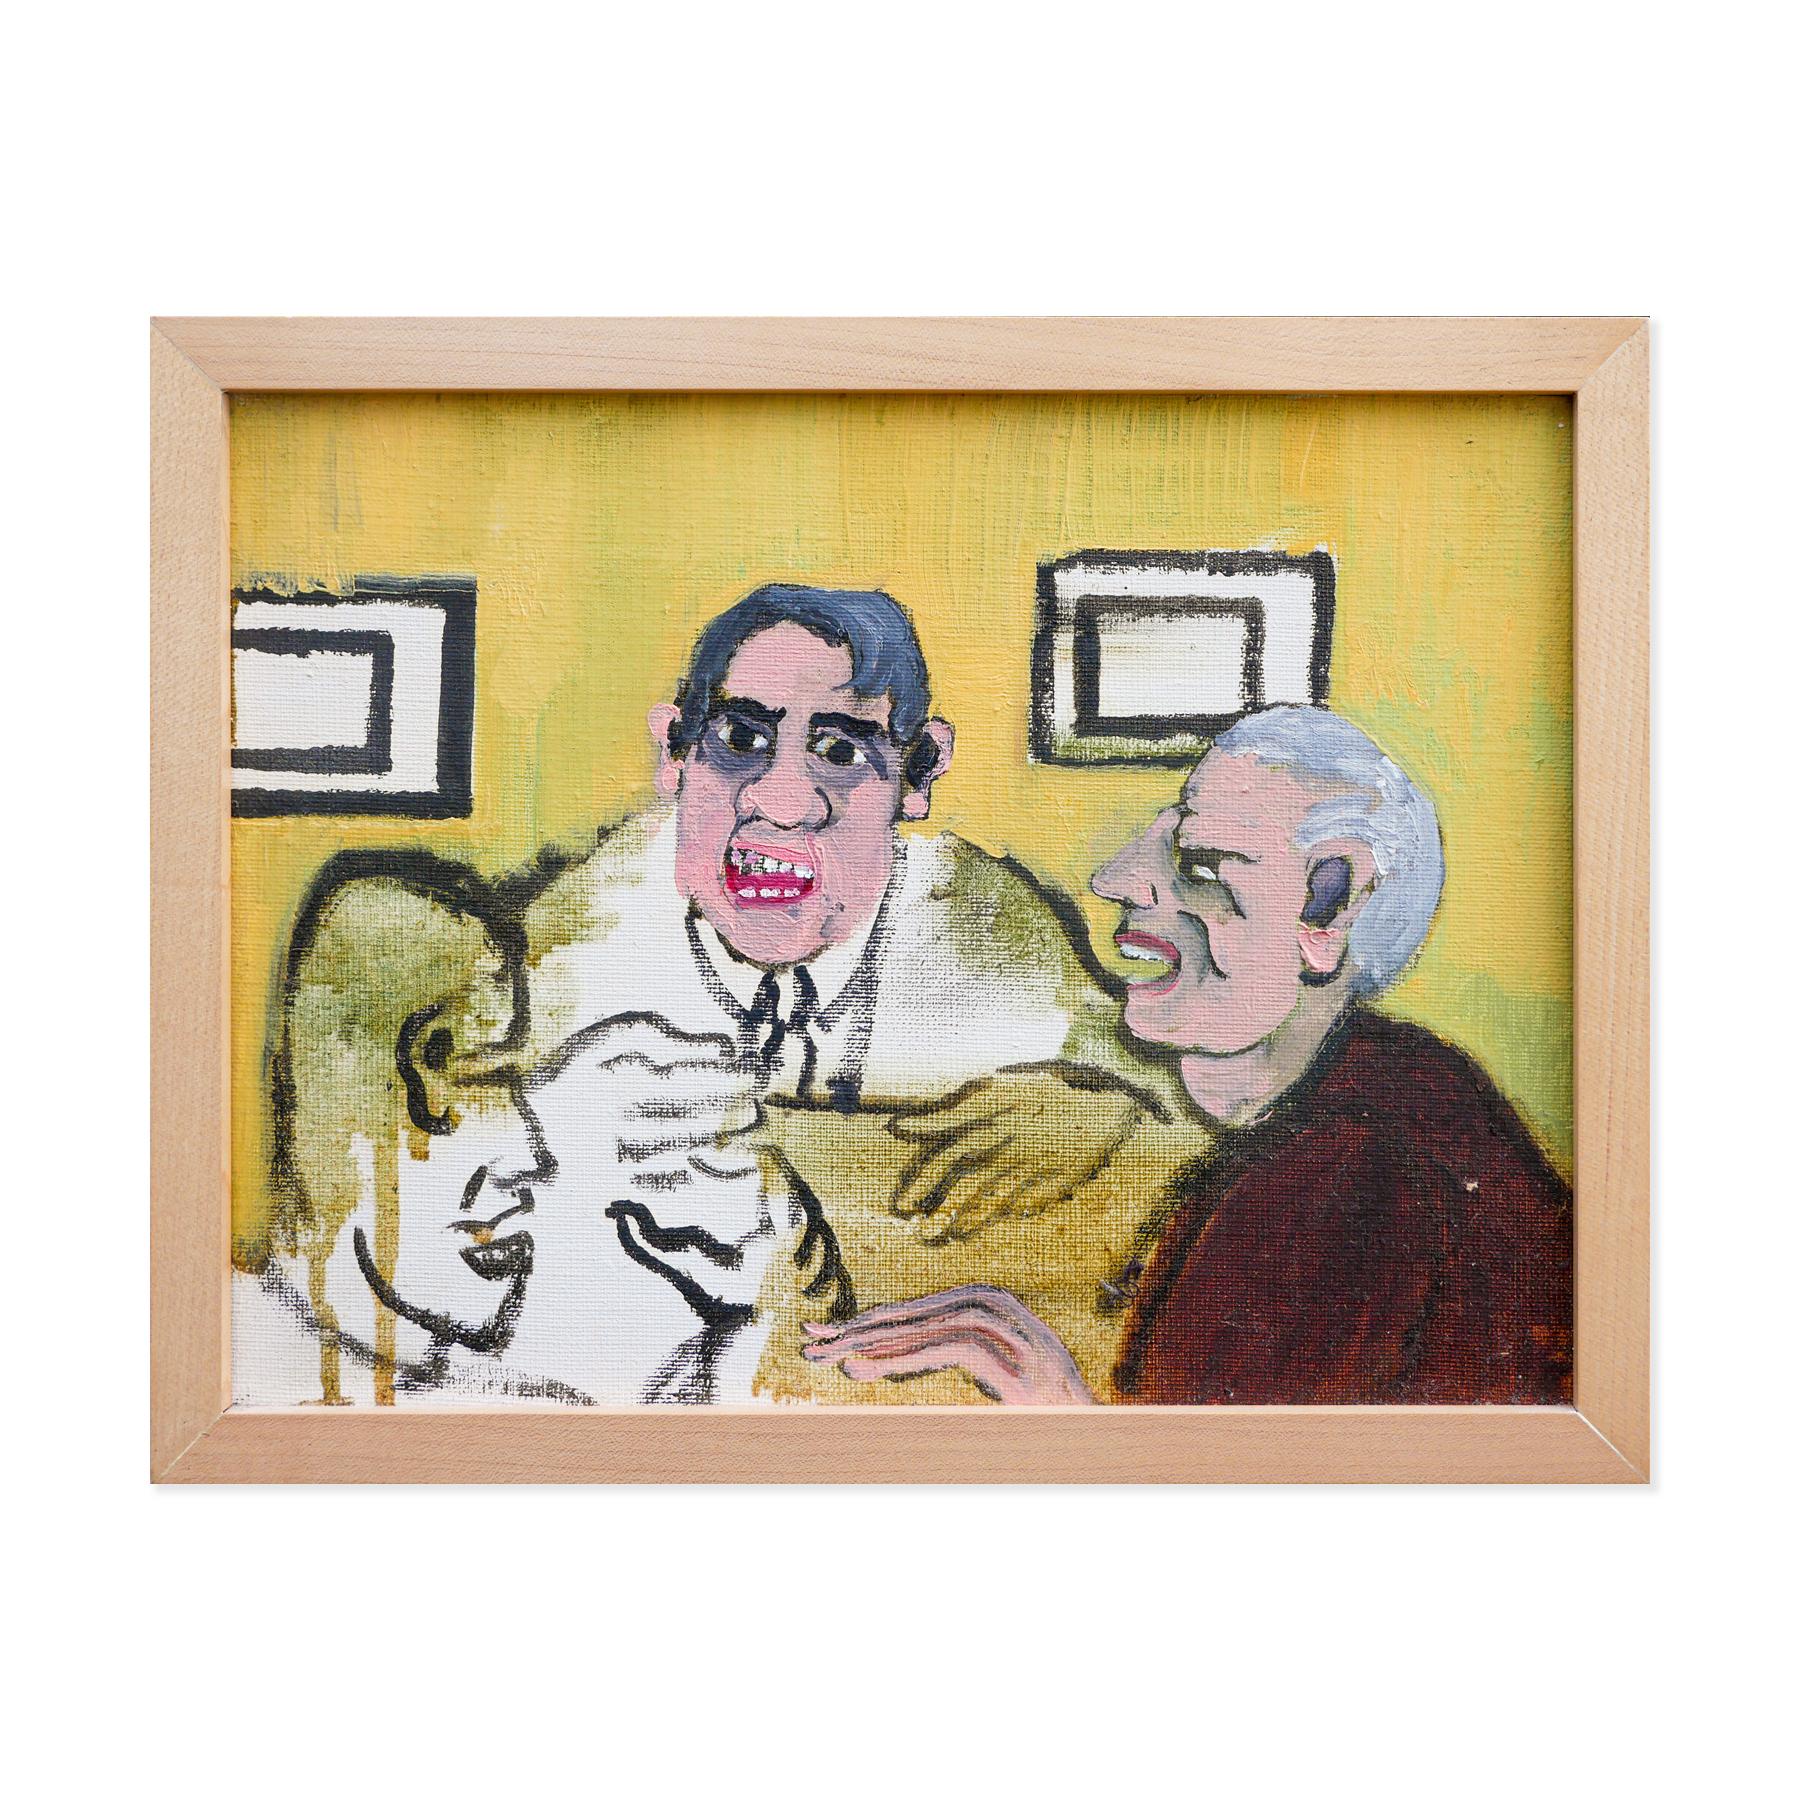 Yellow, brown, and white abstract figurative painting attributed to Ray Collins. The small painting depicts a group of three men around a table in an interior setting. The piece is unsigned. Framed in a simple natural wooden frame.

Dimensions